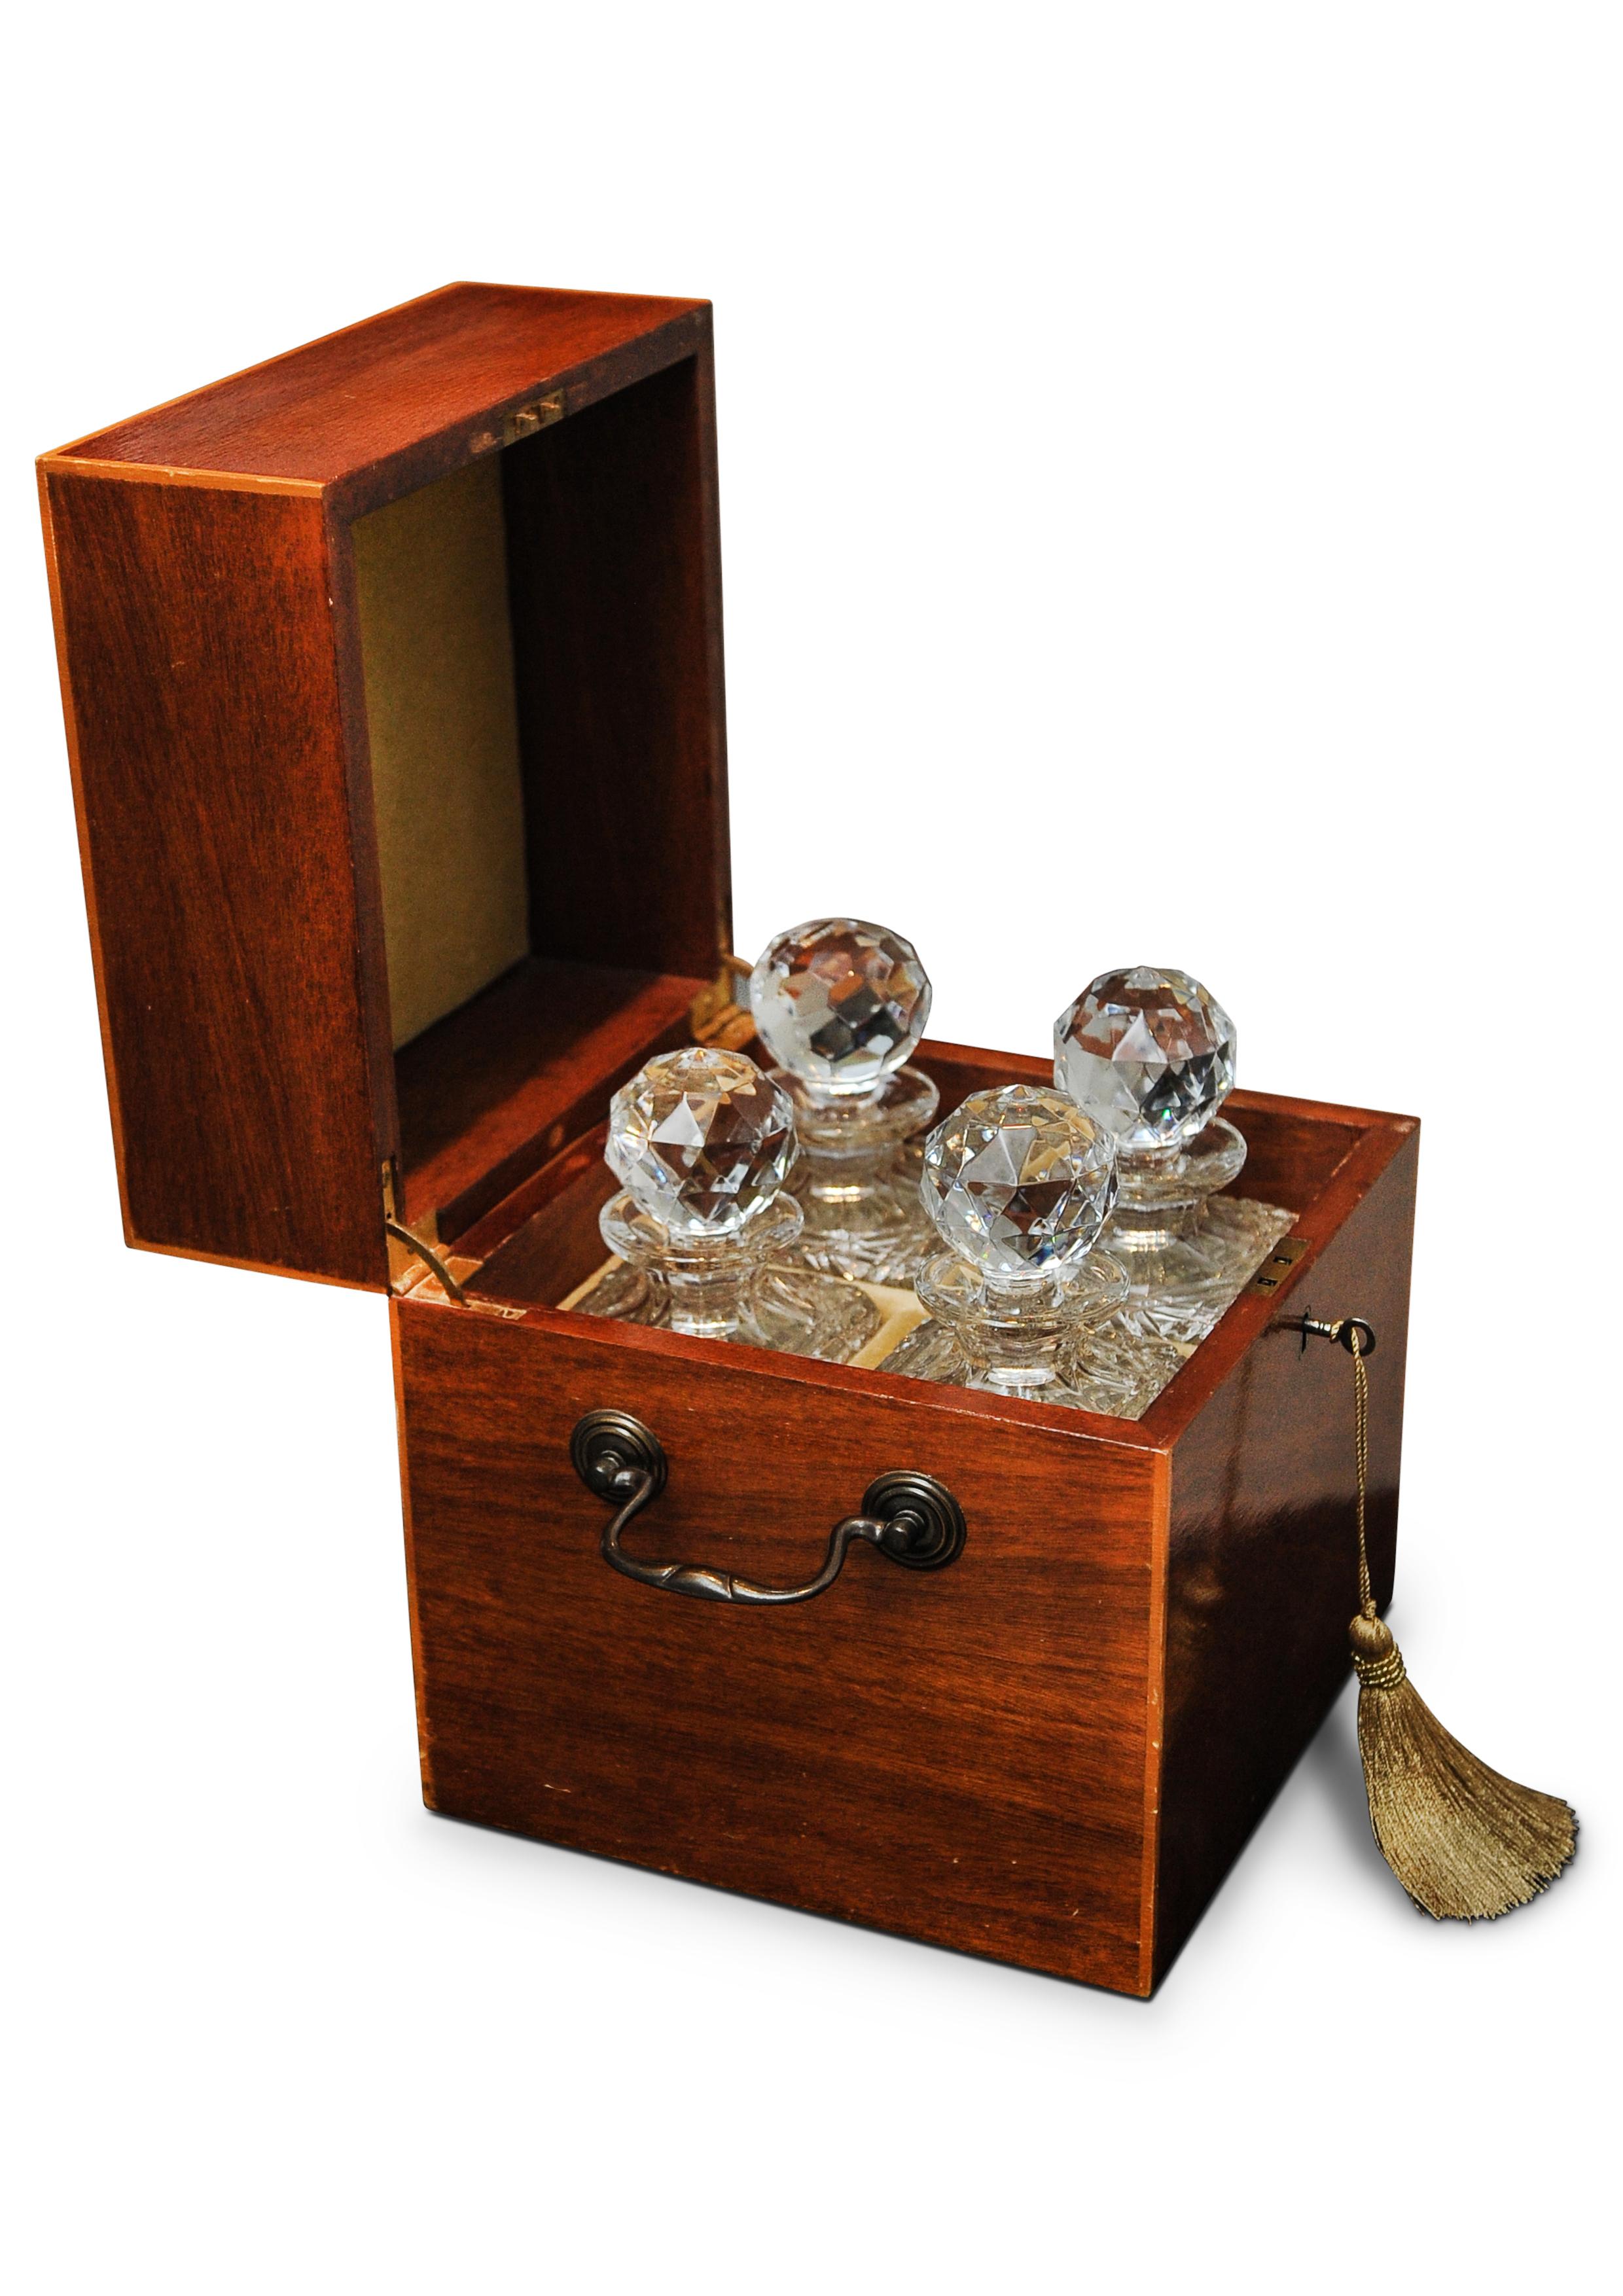 Sheraton Revival Mahogany Decanter Box, With Four Atlantis Decanters & Decorative Inlay

The hinged lid with paterae and line inlaid decoration, the interior with divisions holding with four cut glass decanters with stoppers. 





